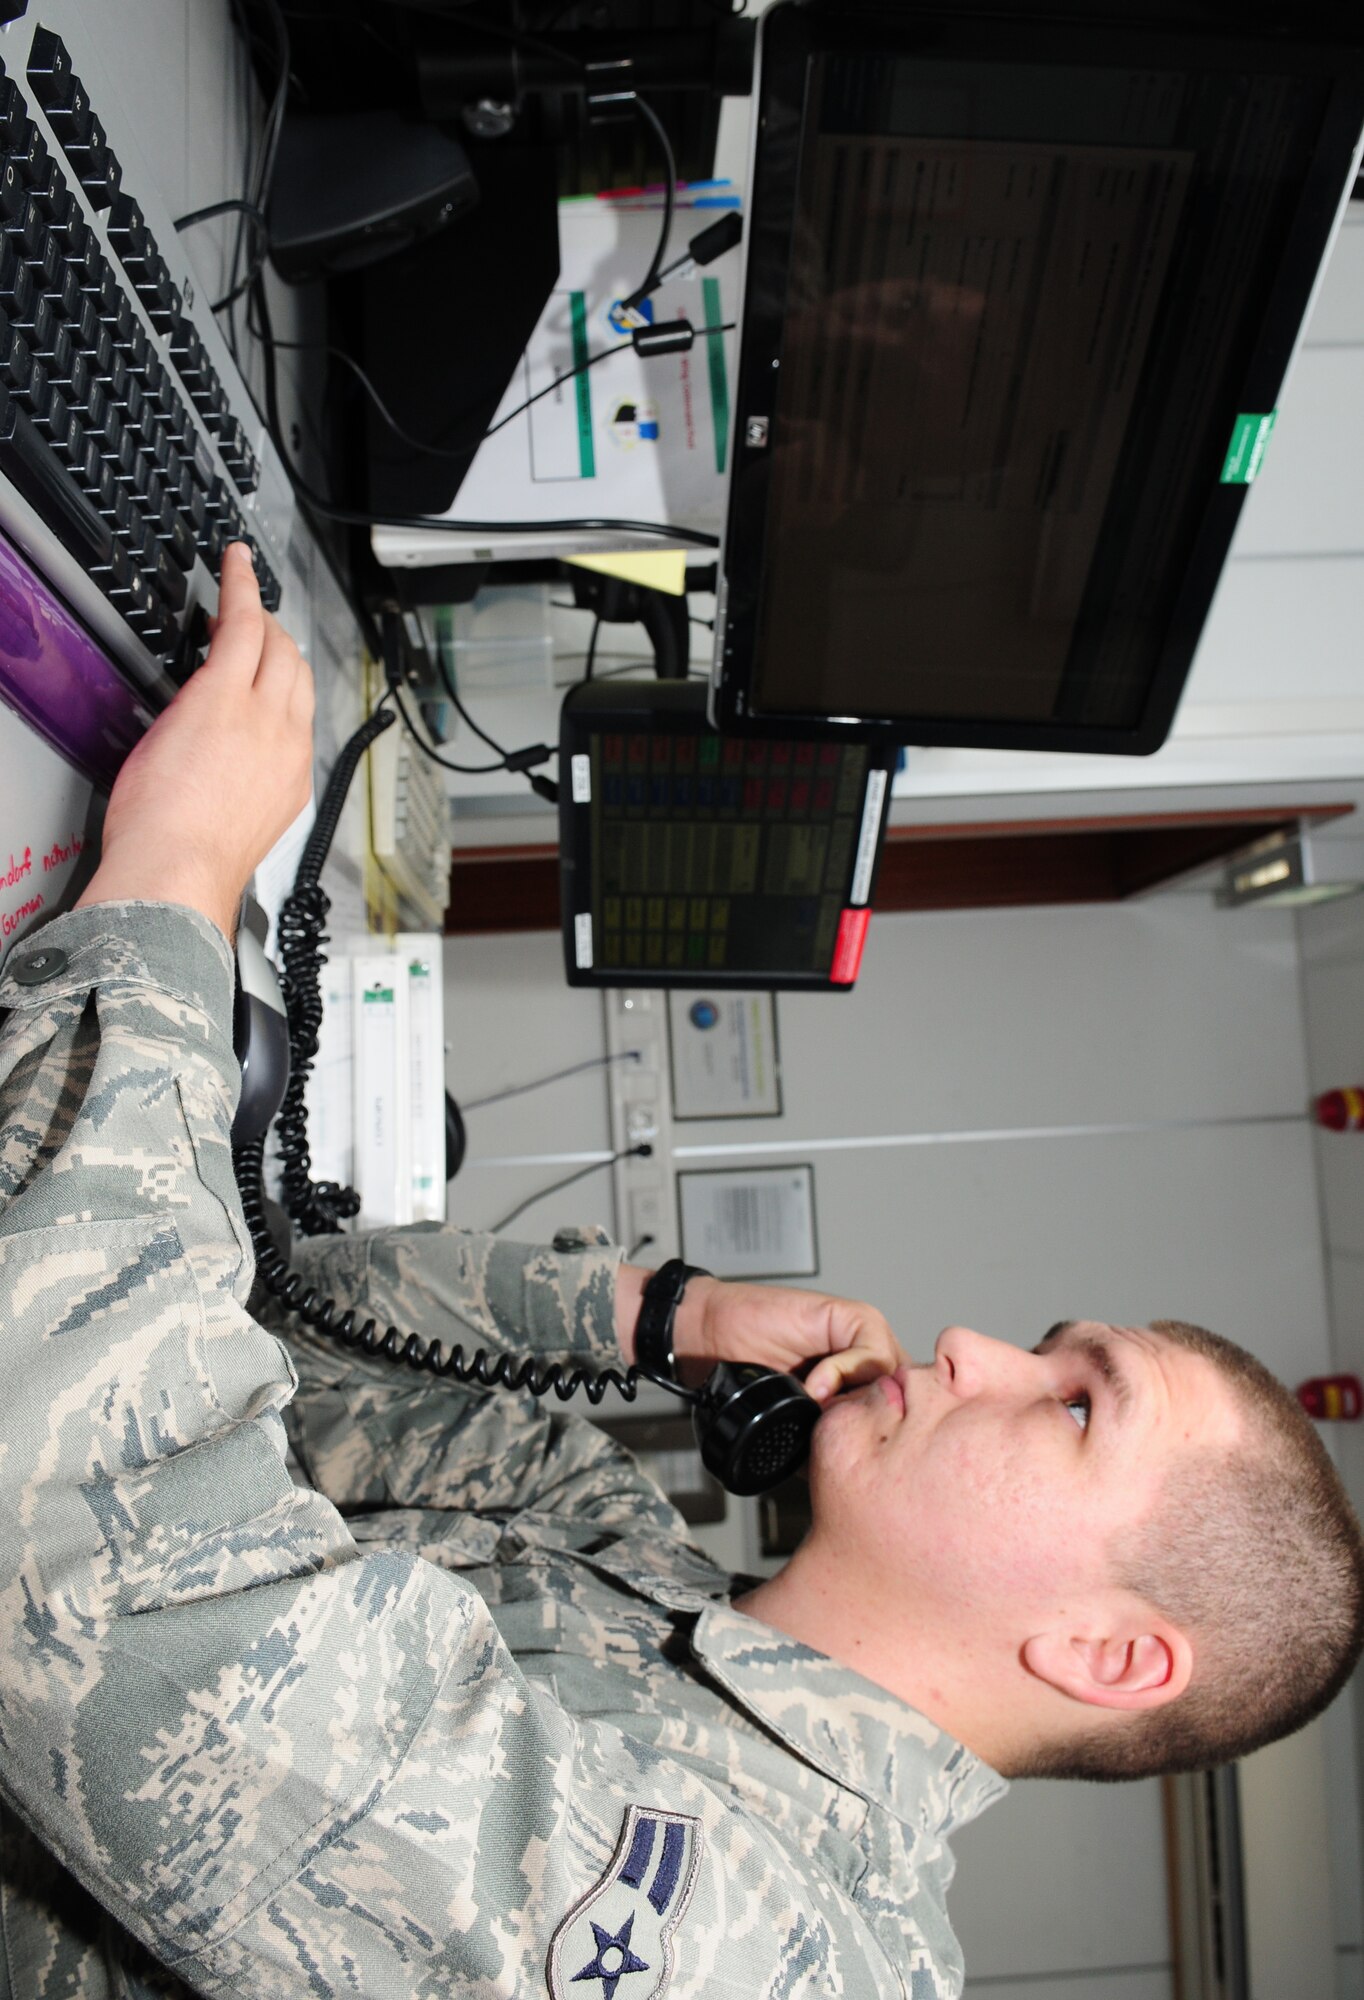 SPANGDAHLEM AIR BASE, Germany – Airman 1st Class Christopher Mills, 52nd Fighter Wing Command Post emergency action controller, is the Super Saber Performer for the week of Sept. 9-15. (U.S. Air Force photo/Airman 1st Class Matthew Fredericks)